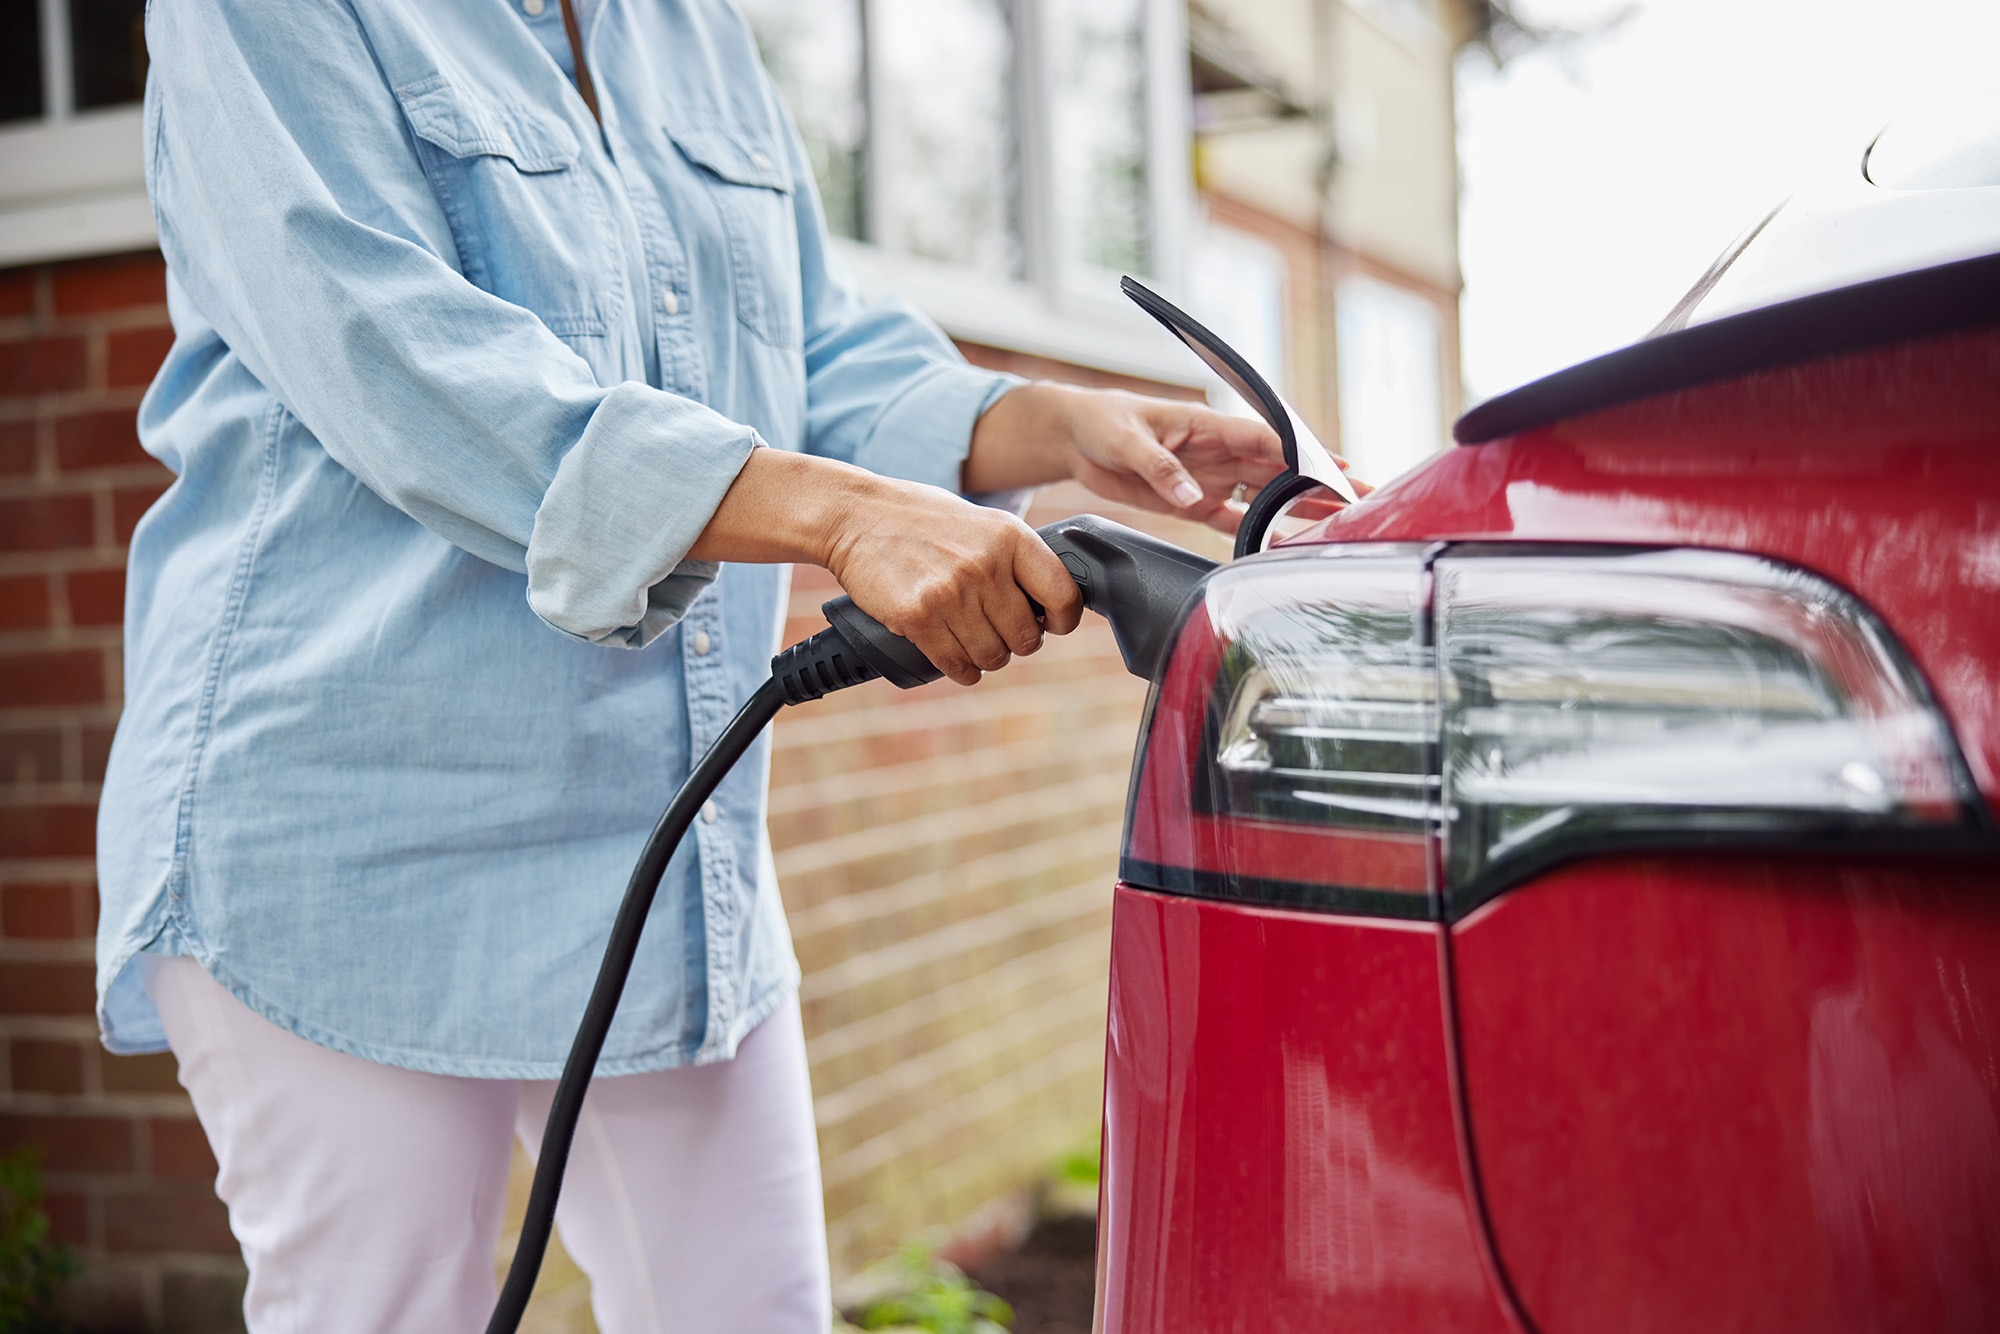 A person attaches a charging cord to an electric vehicle.